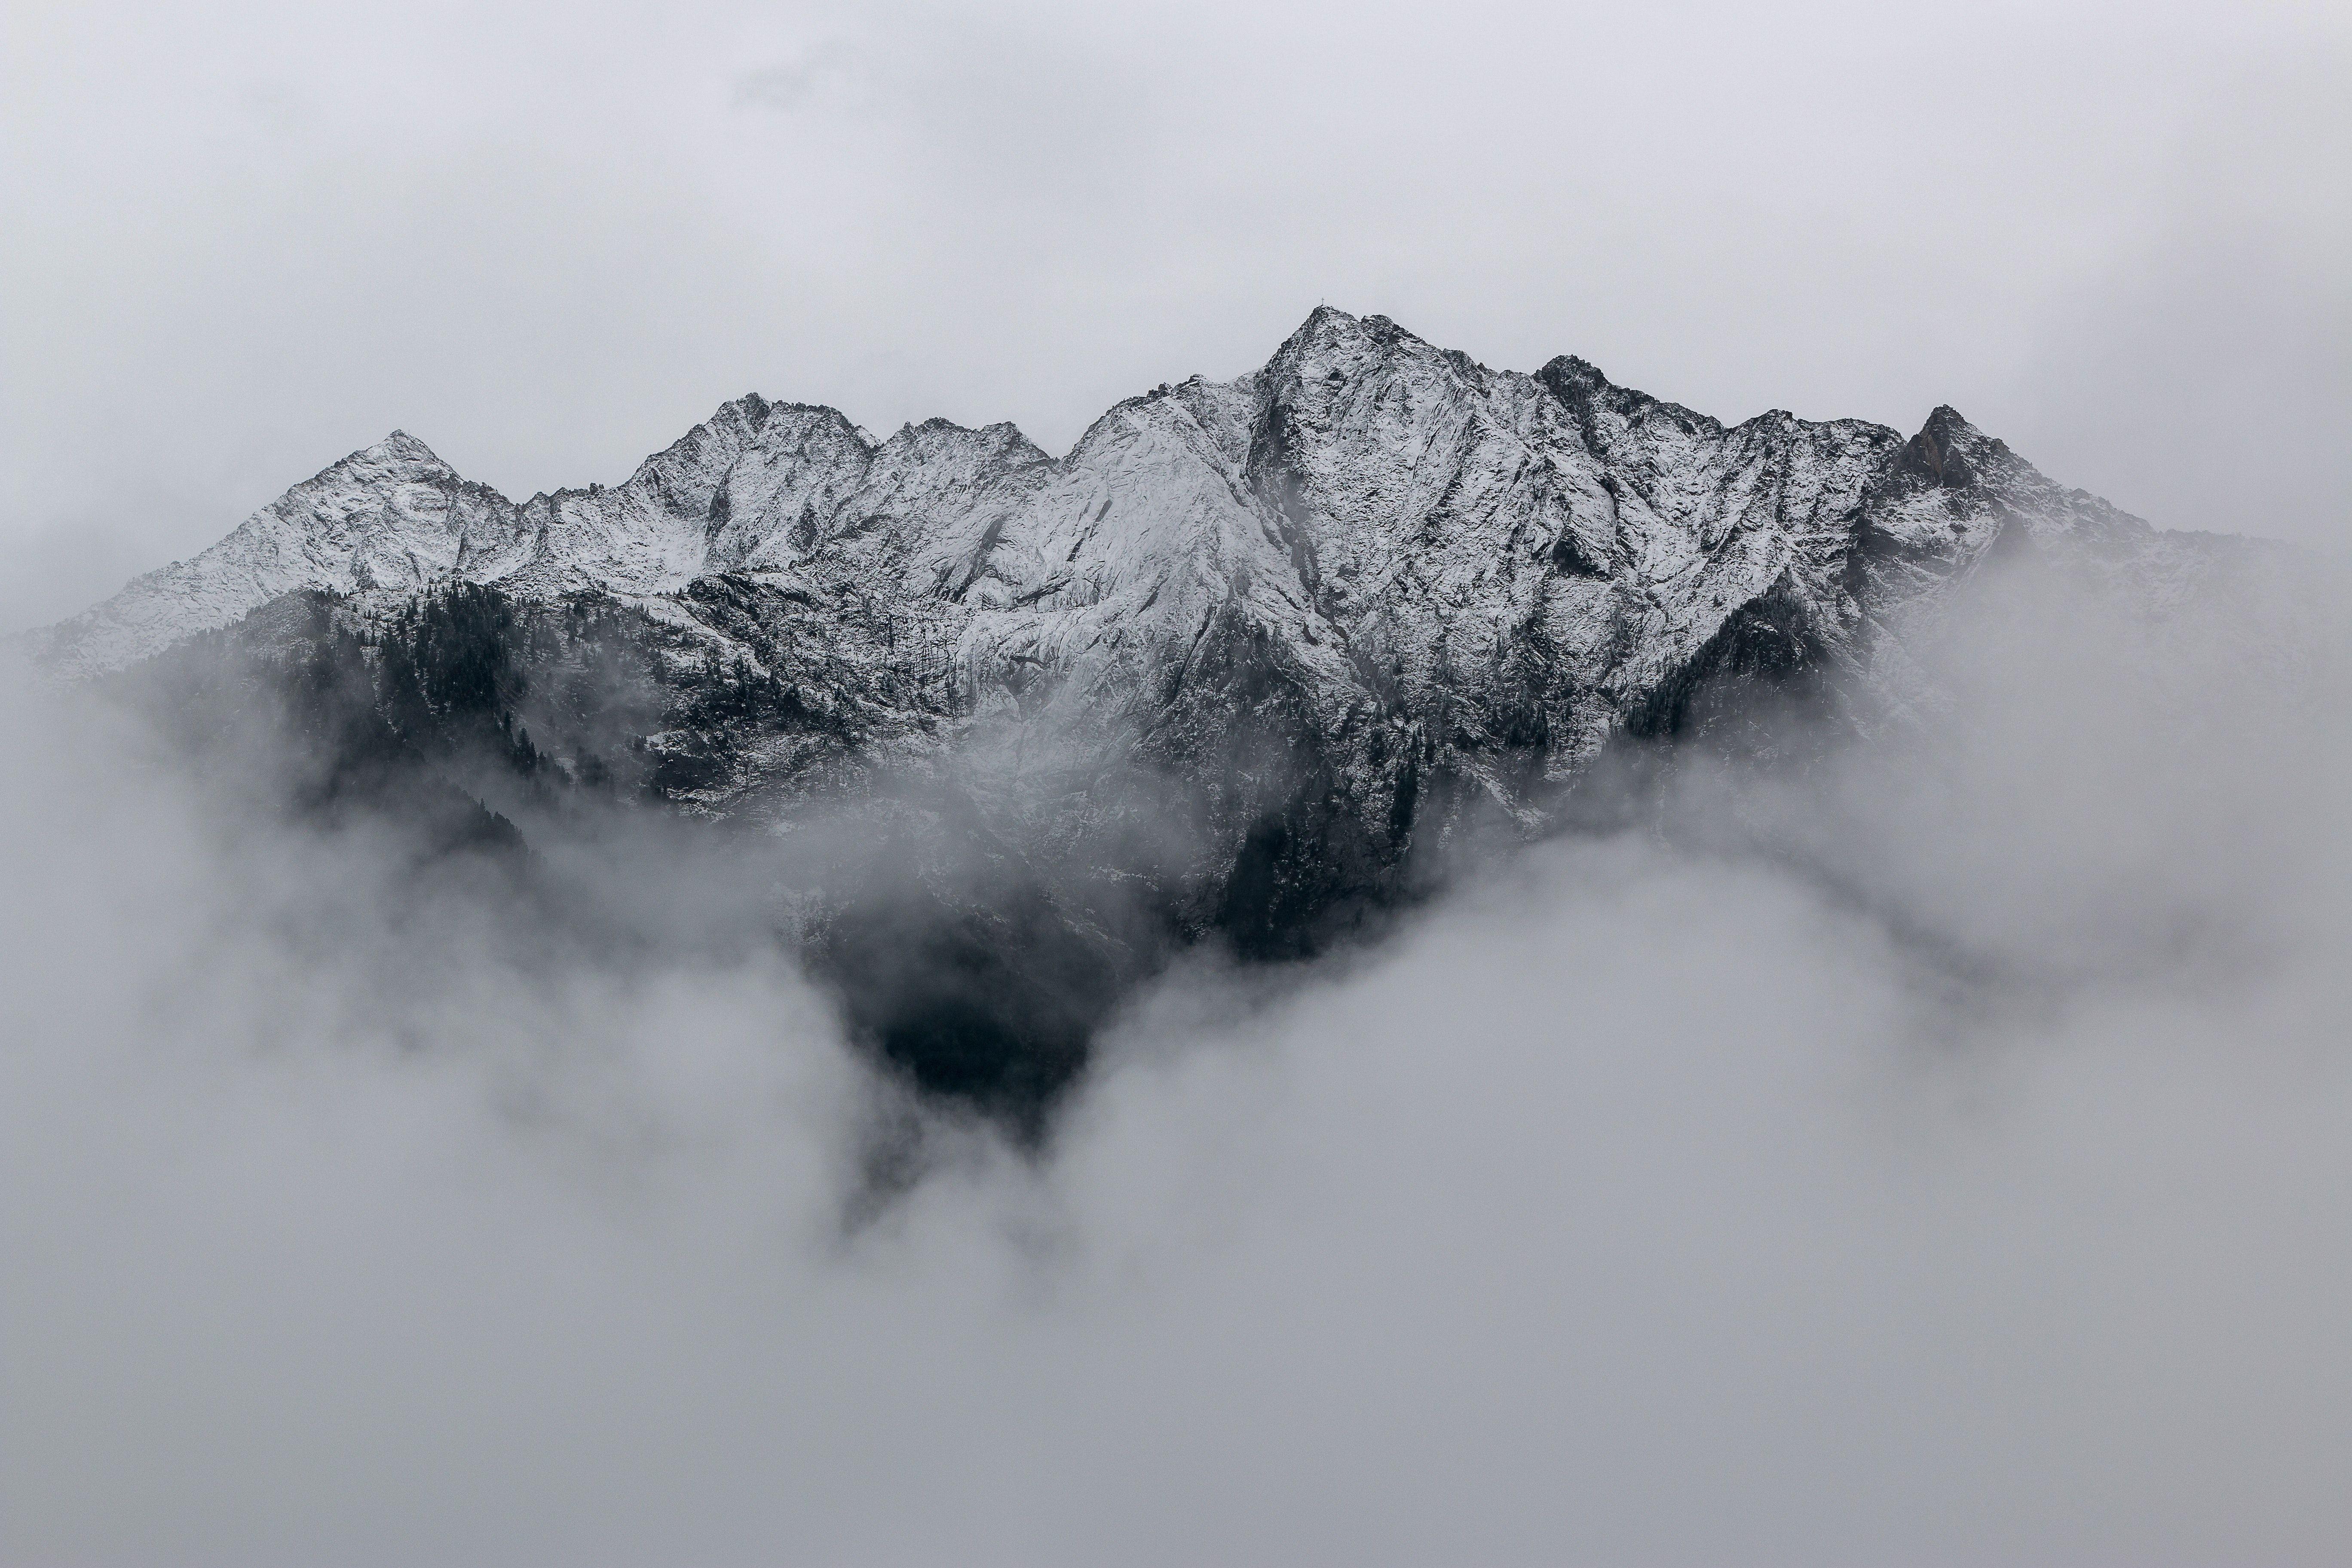 Wallpaper ID 233898  black and white image of foggy mountains with pine  tree silhouettes snowcapped peaks 4k wallpaper free download